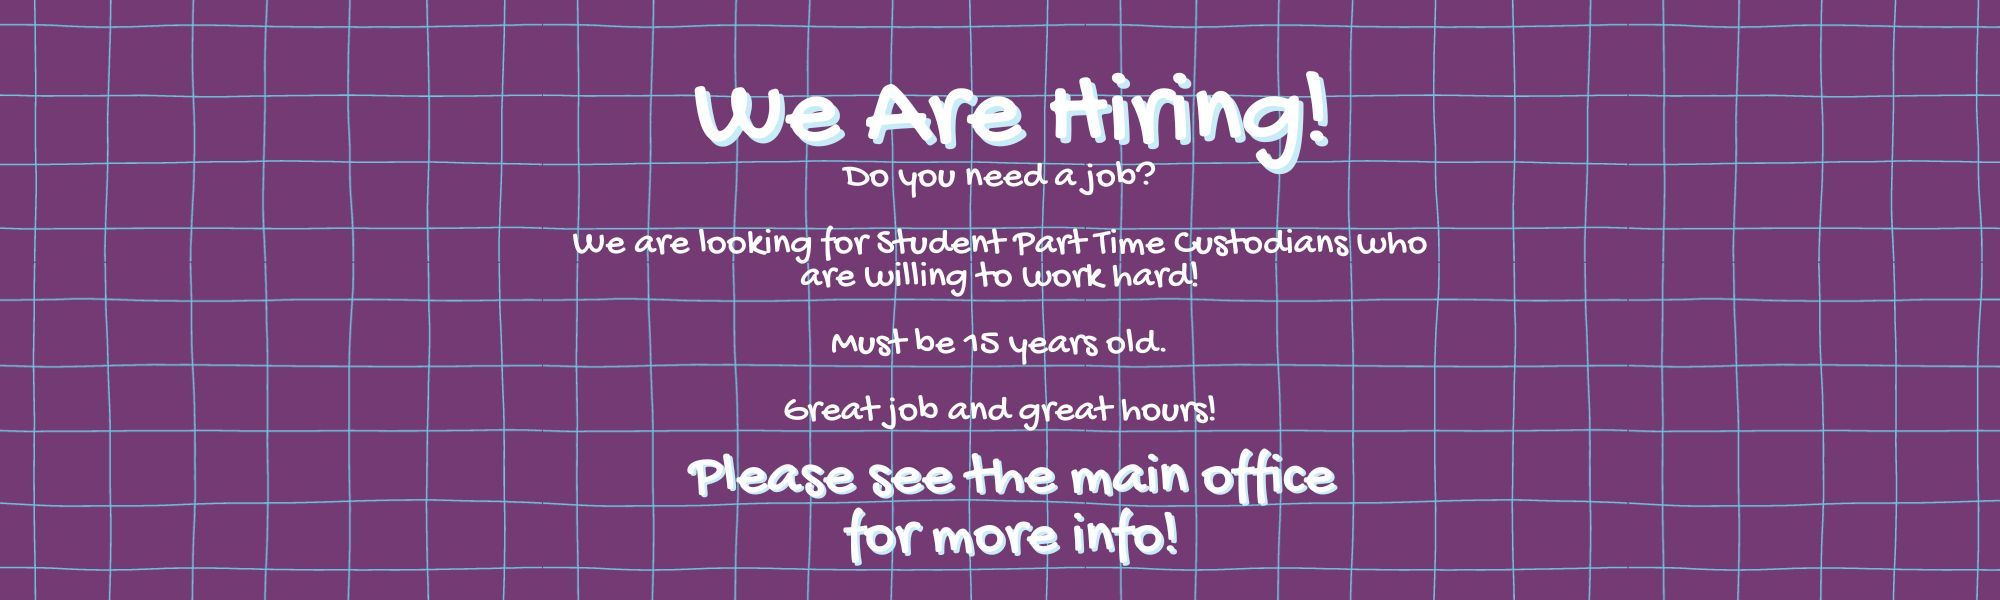 We are hiring Student Part Time Custodians. Must be 15 years old. Please see main office for more information.